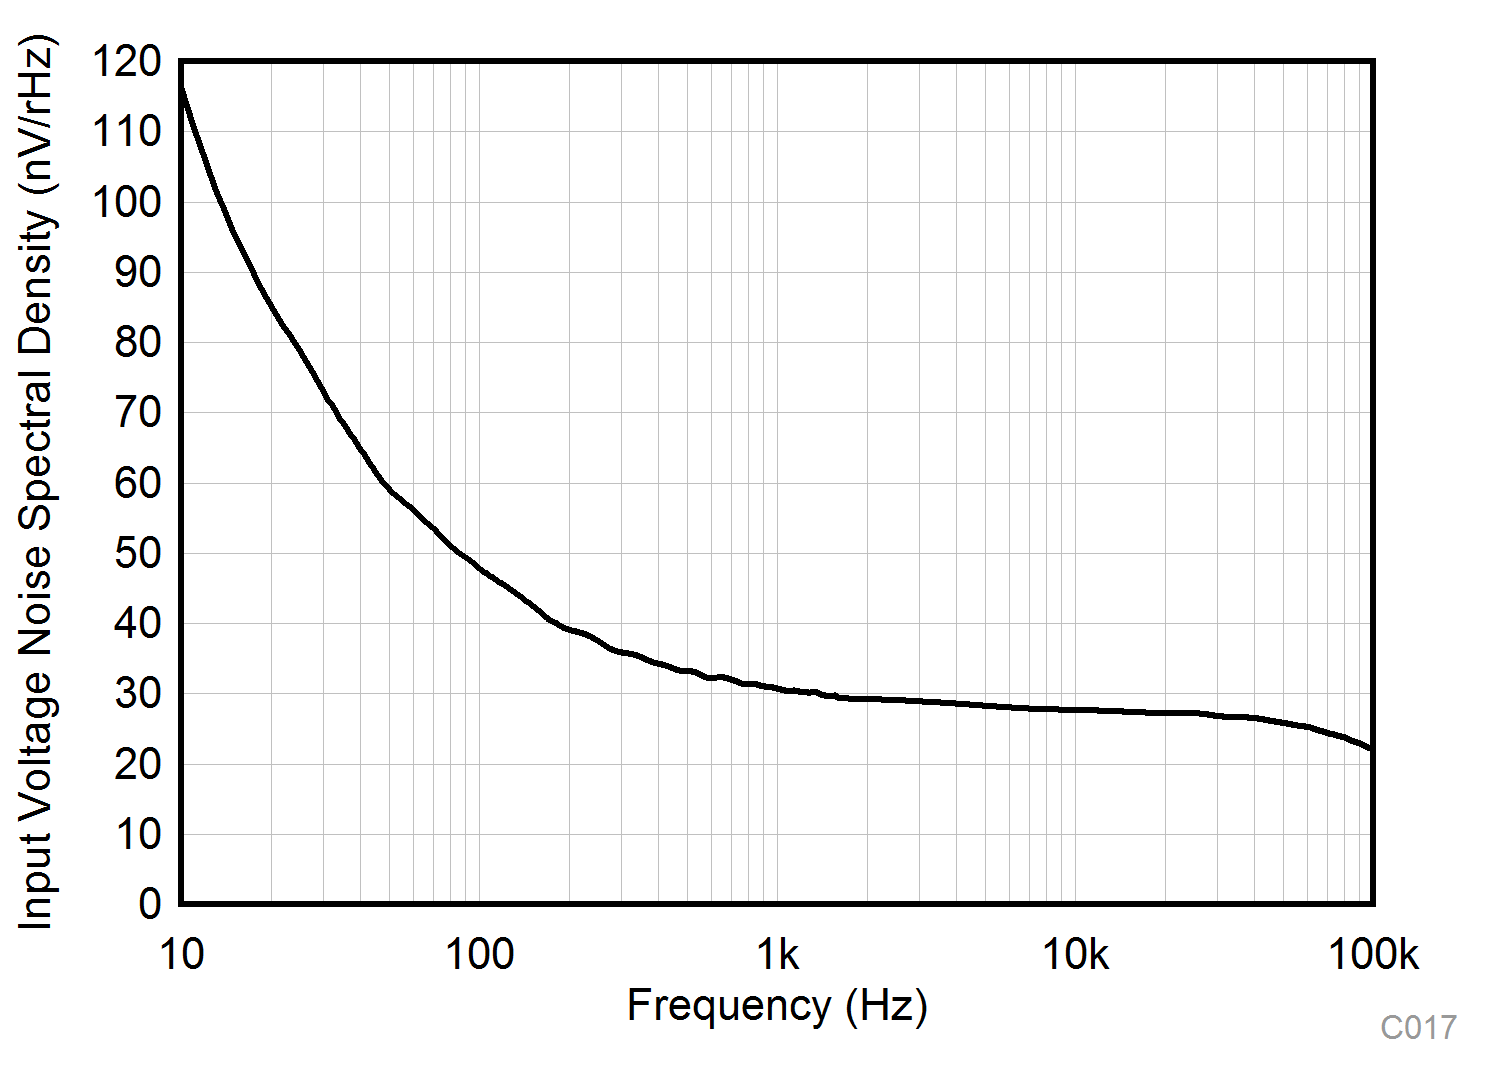 TLV9104-Q1 Input Voltage Noise Spectral Density vs Frequency